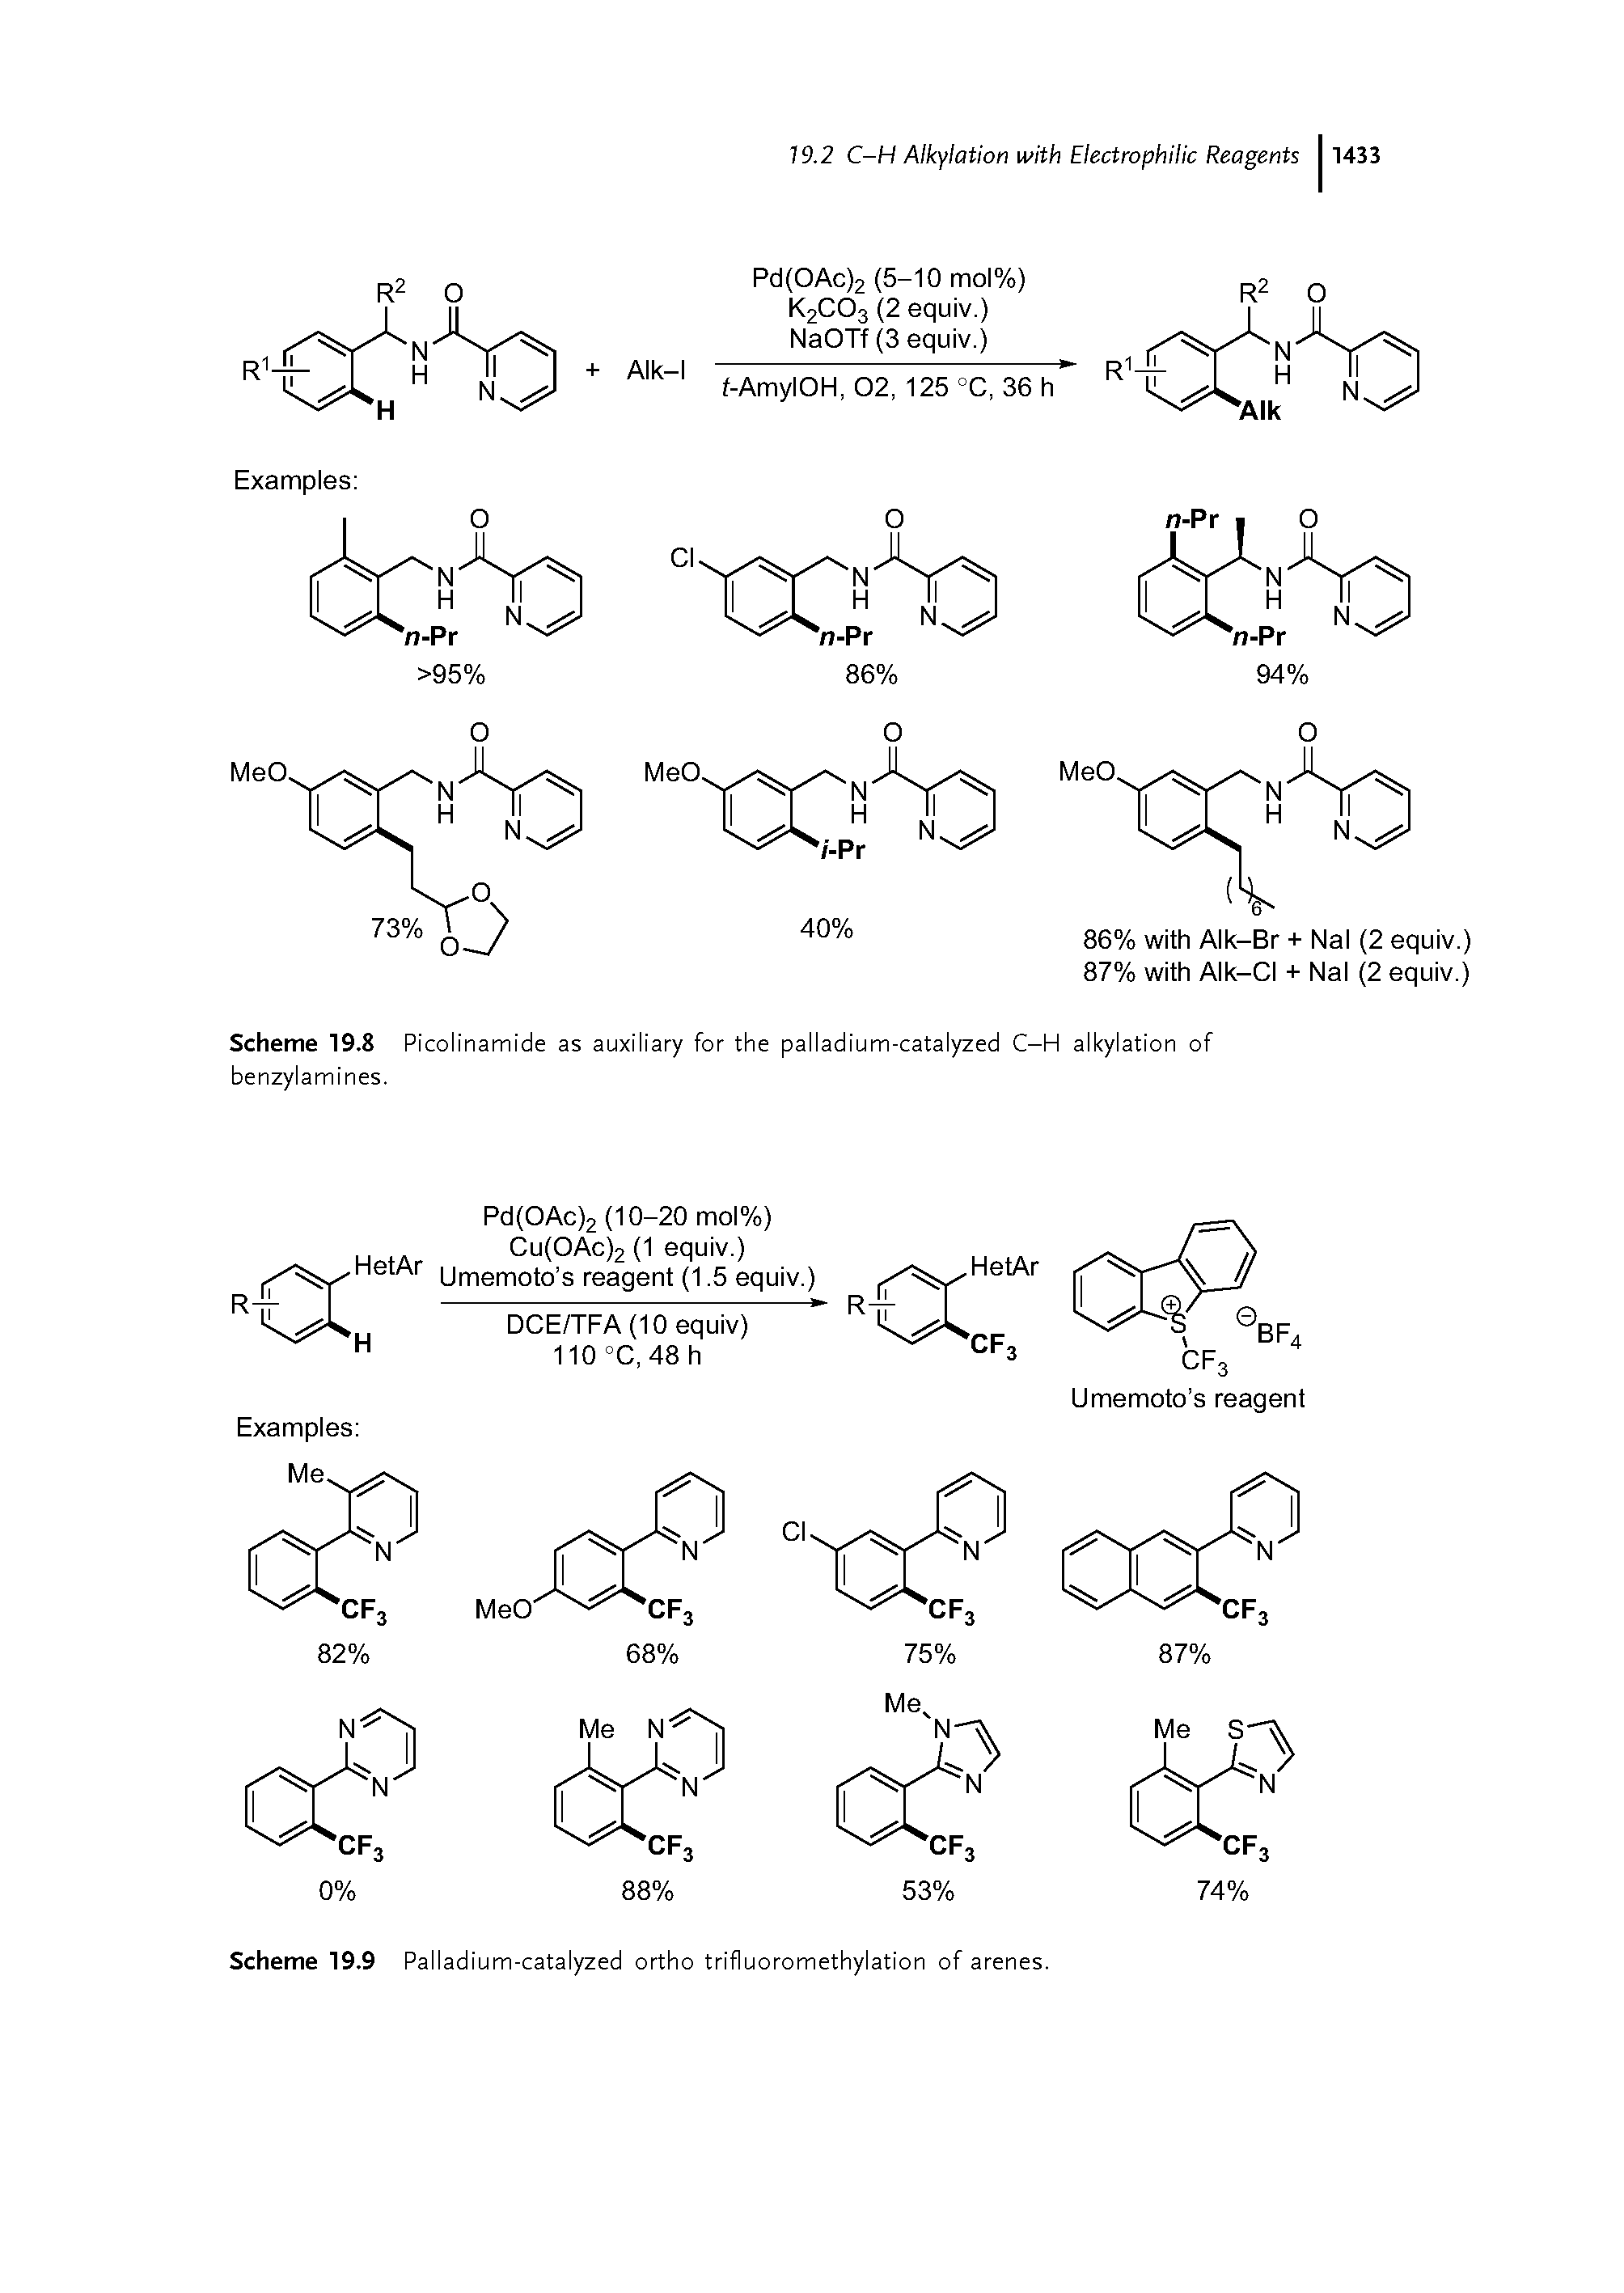 Scheme 19.8 Picolinamide as auxiliary for the palladium-catalyzed C-H alkylation of benzylamines.